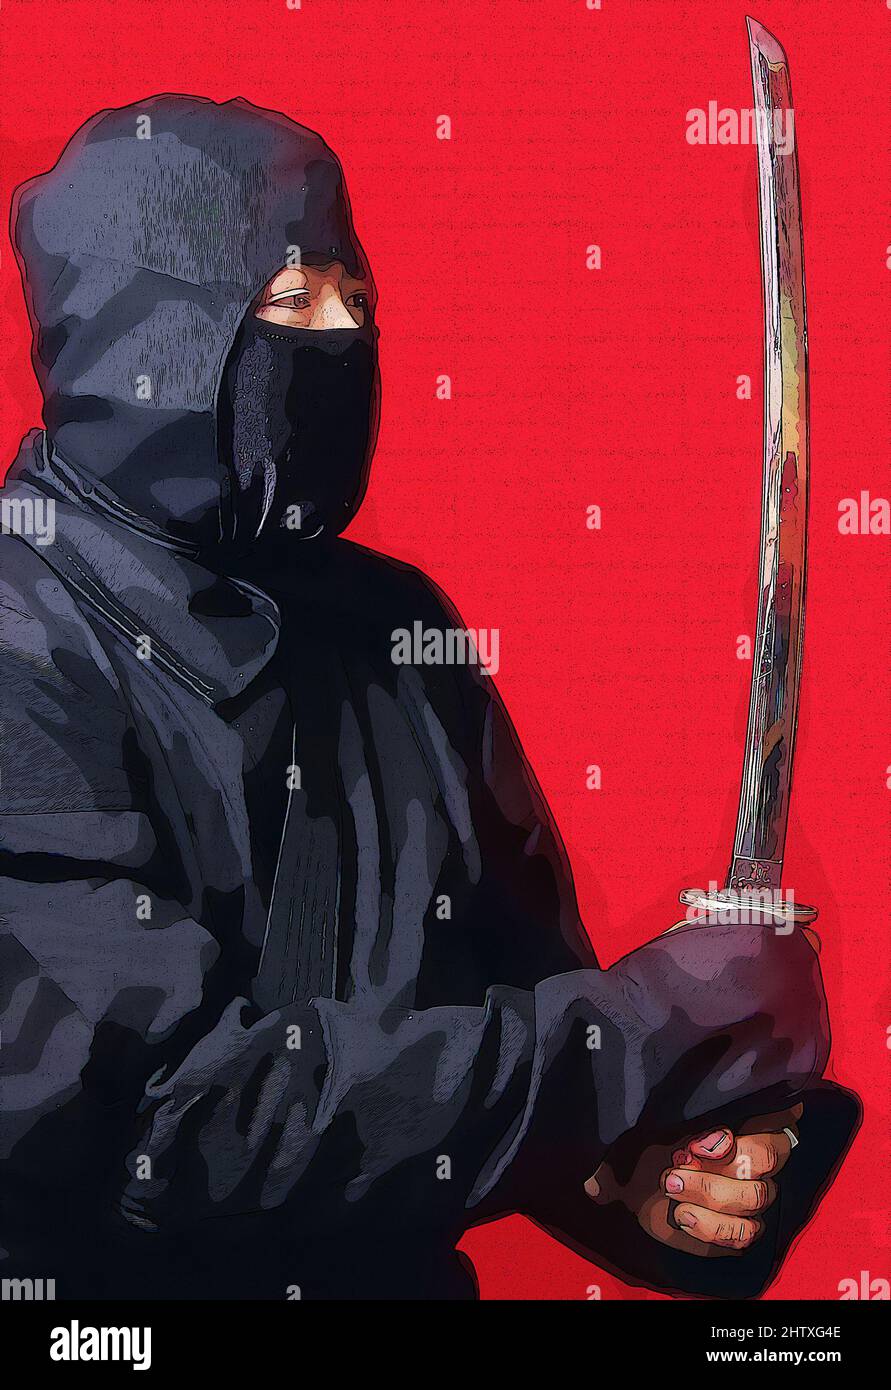 Ninja With Throwing Star Weapon and Red Background Comic Style Illustration Stock Photo